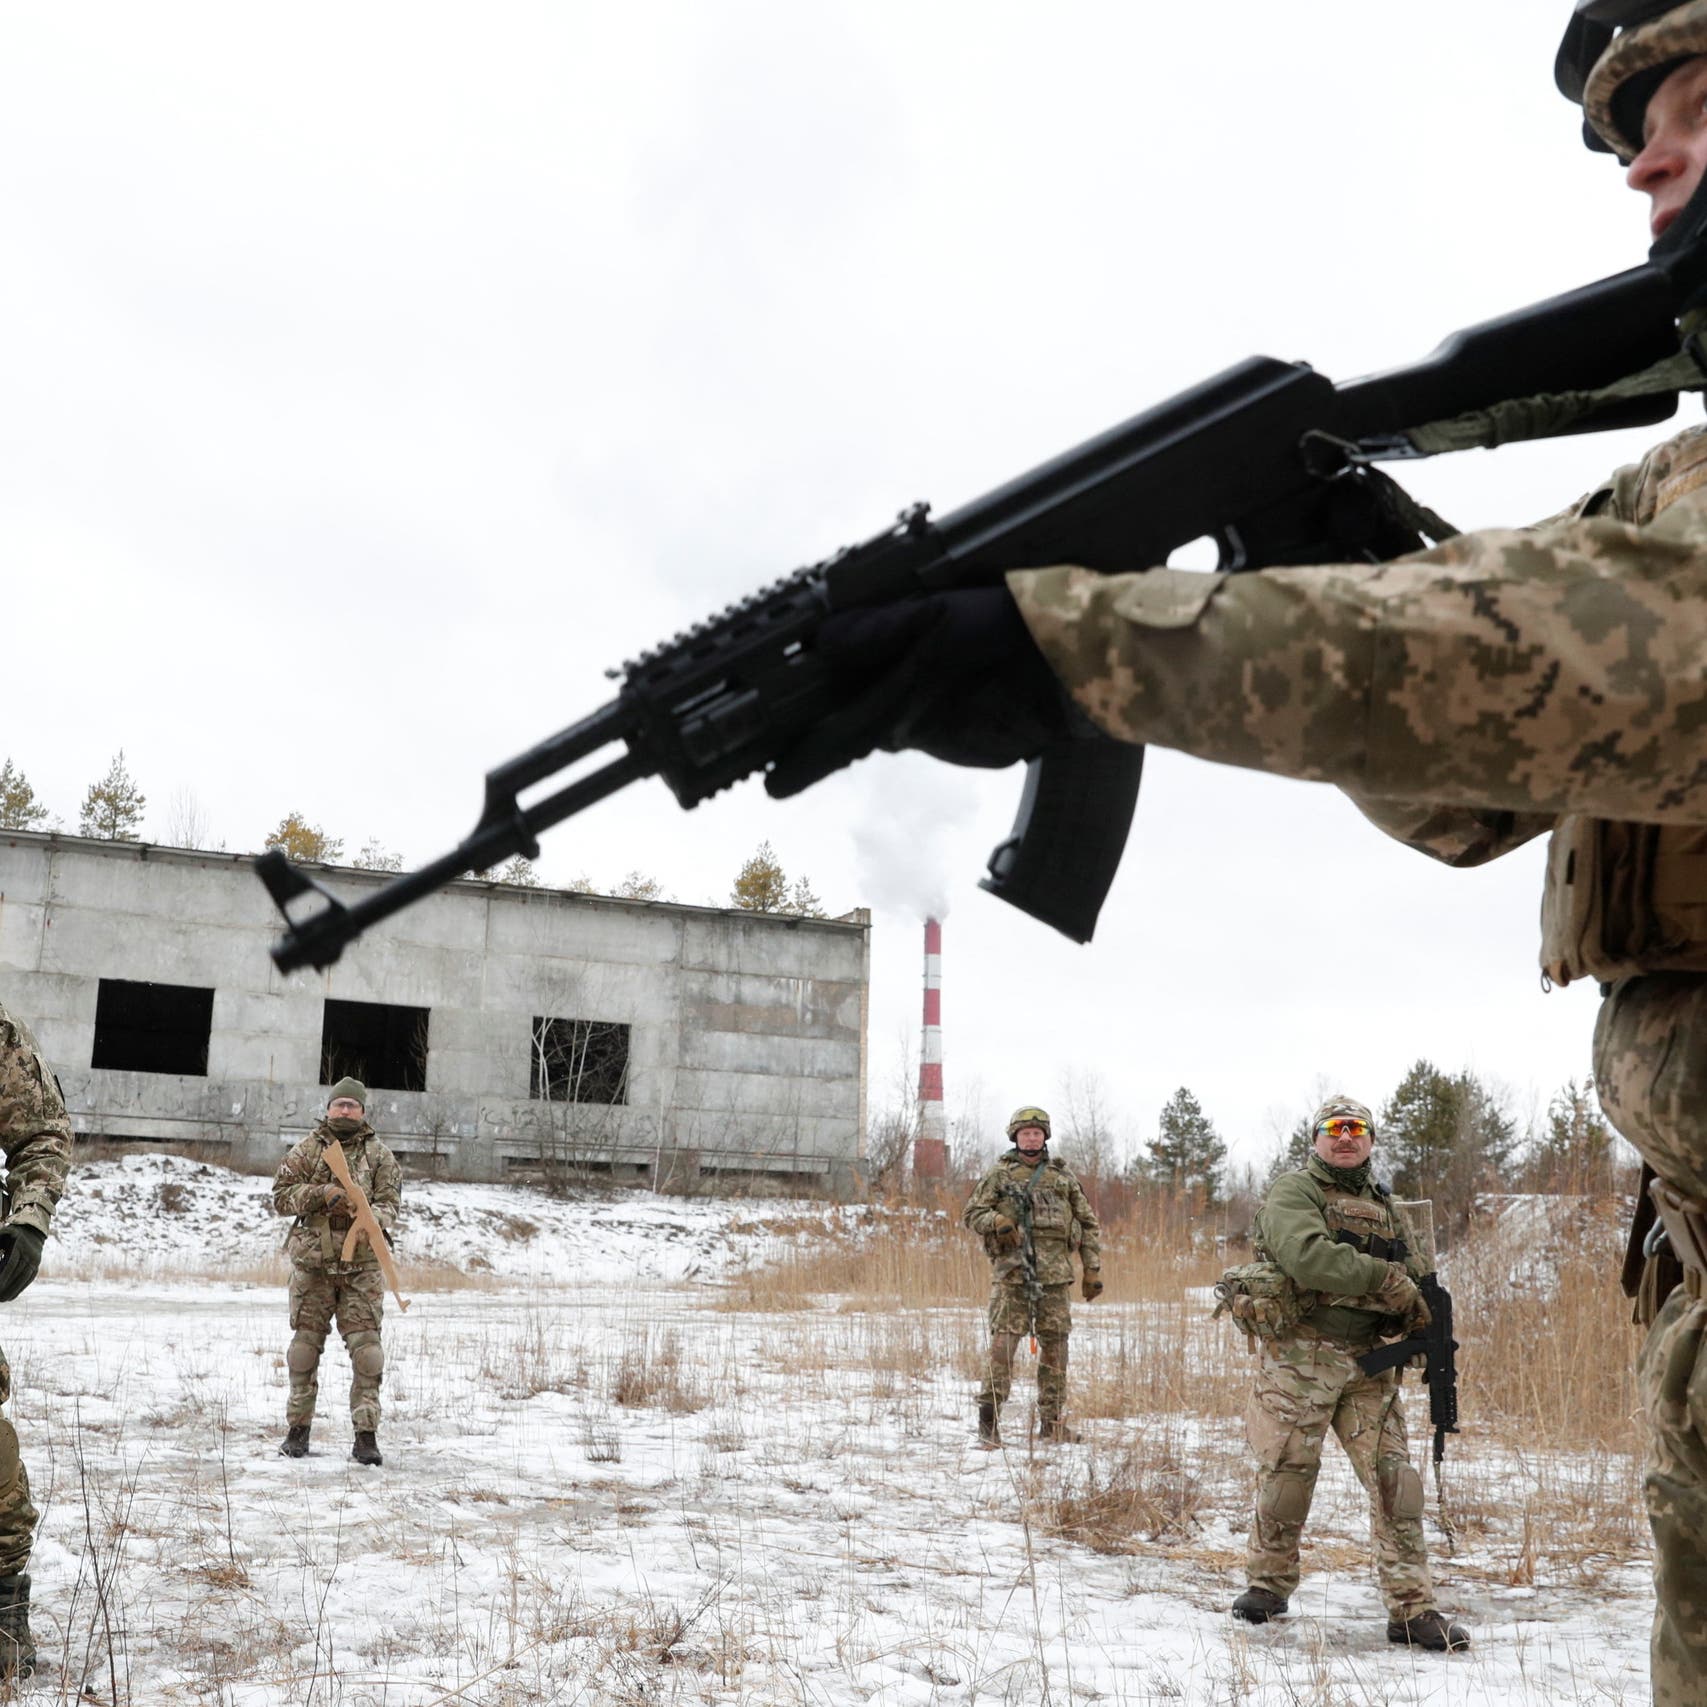 US intelligence: Russia may stage video to create pretext for Ukraine war